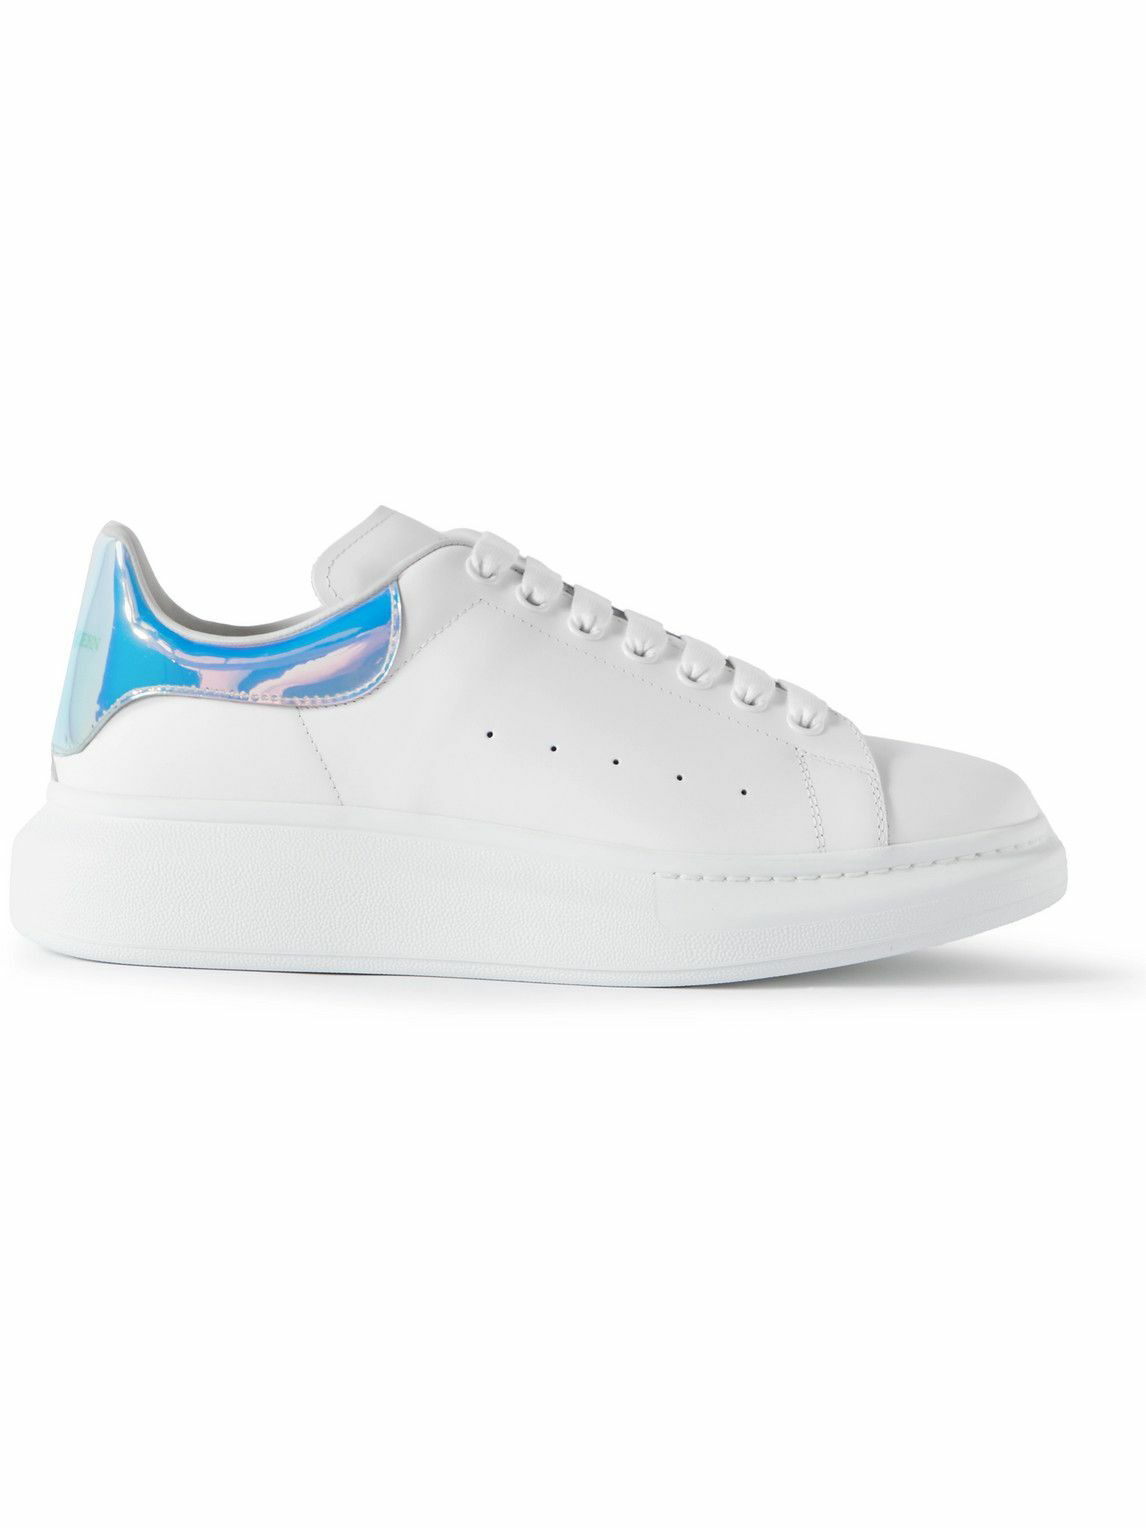 Alexander McQueen - Exaggerated-Sole Leather Sneakers - White Alexander ...